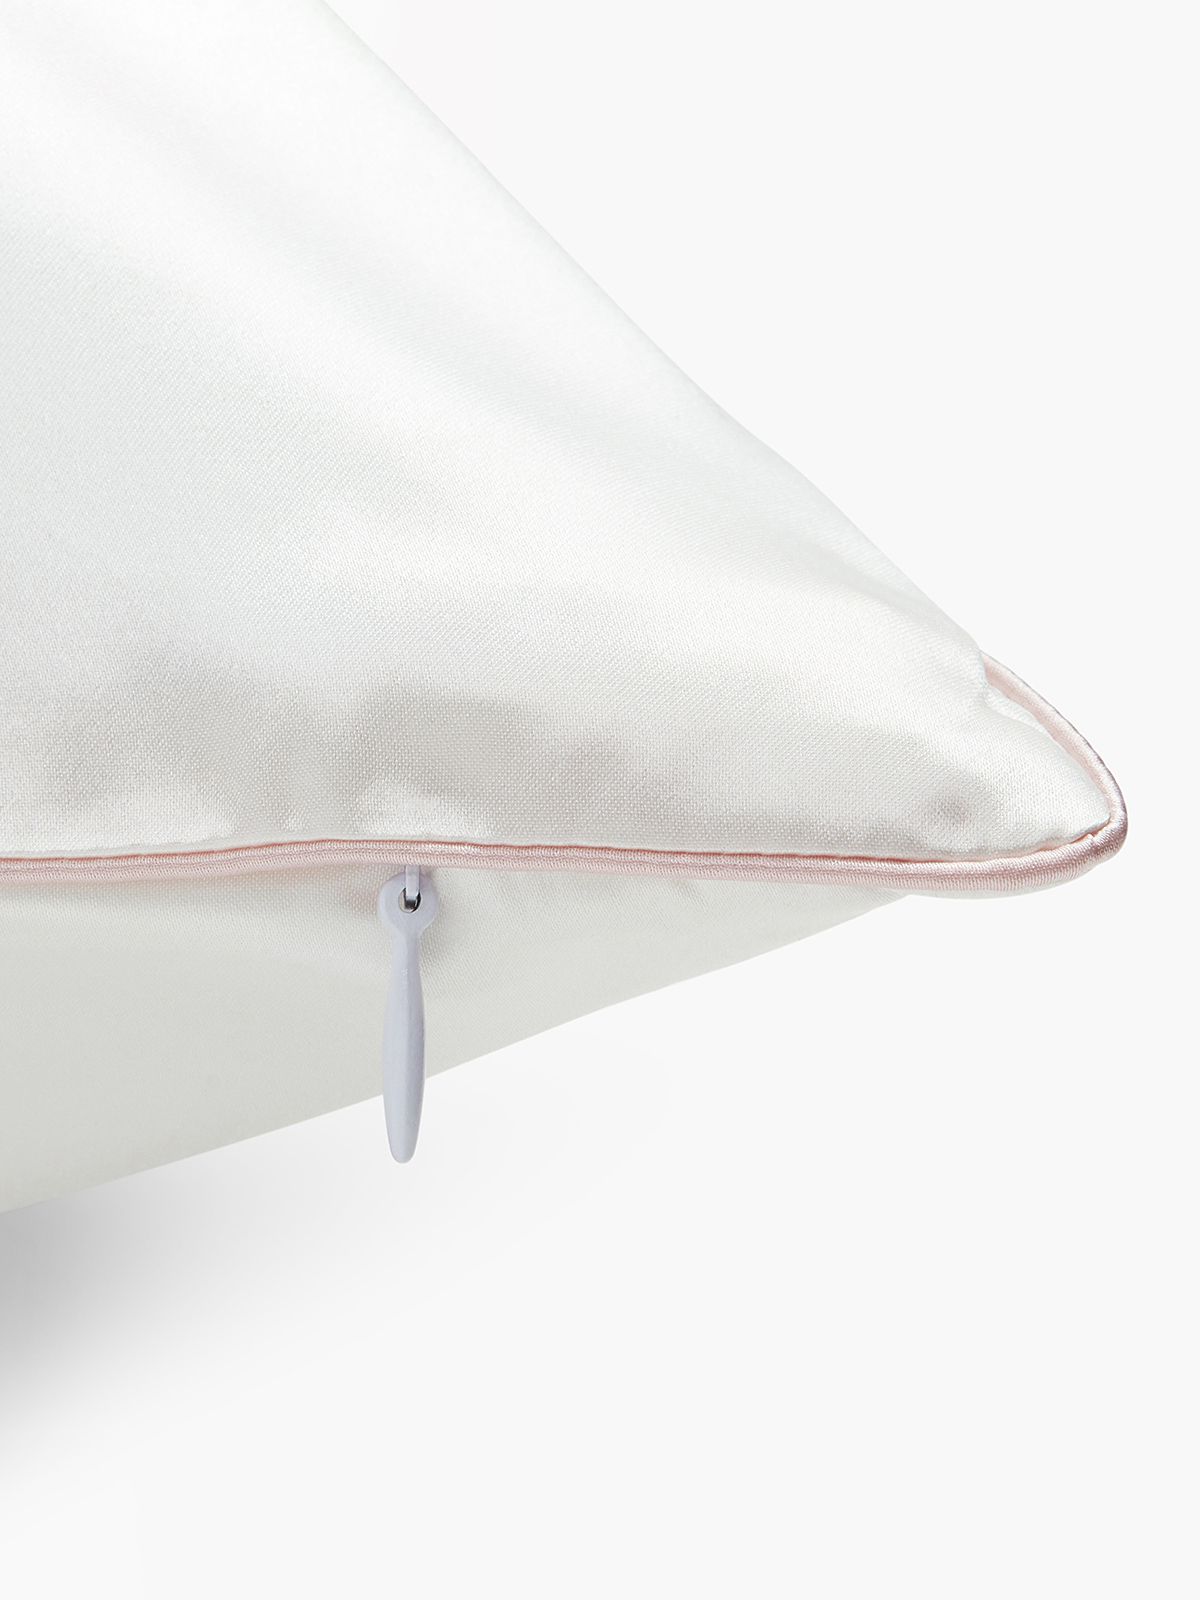 22 Momme Mulberry Silk Pillowcase With Trimming